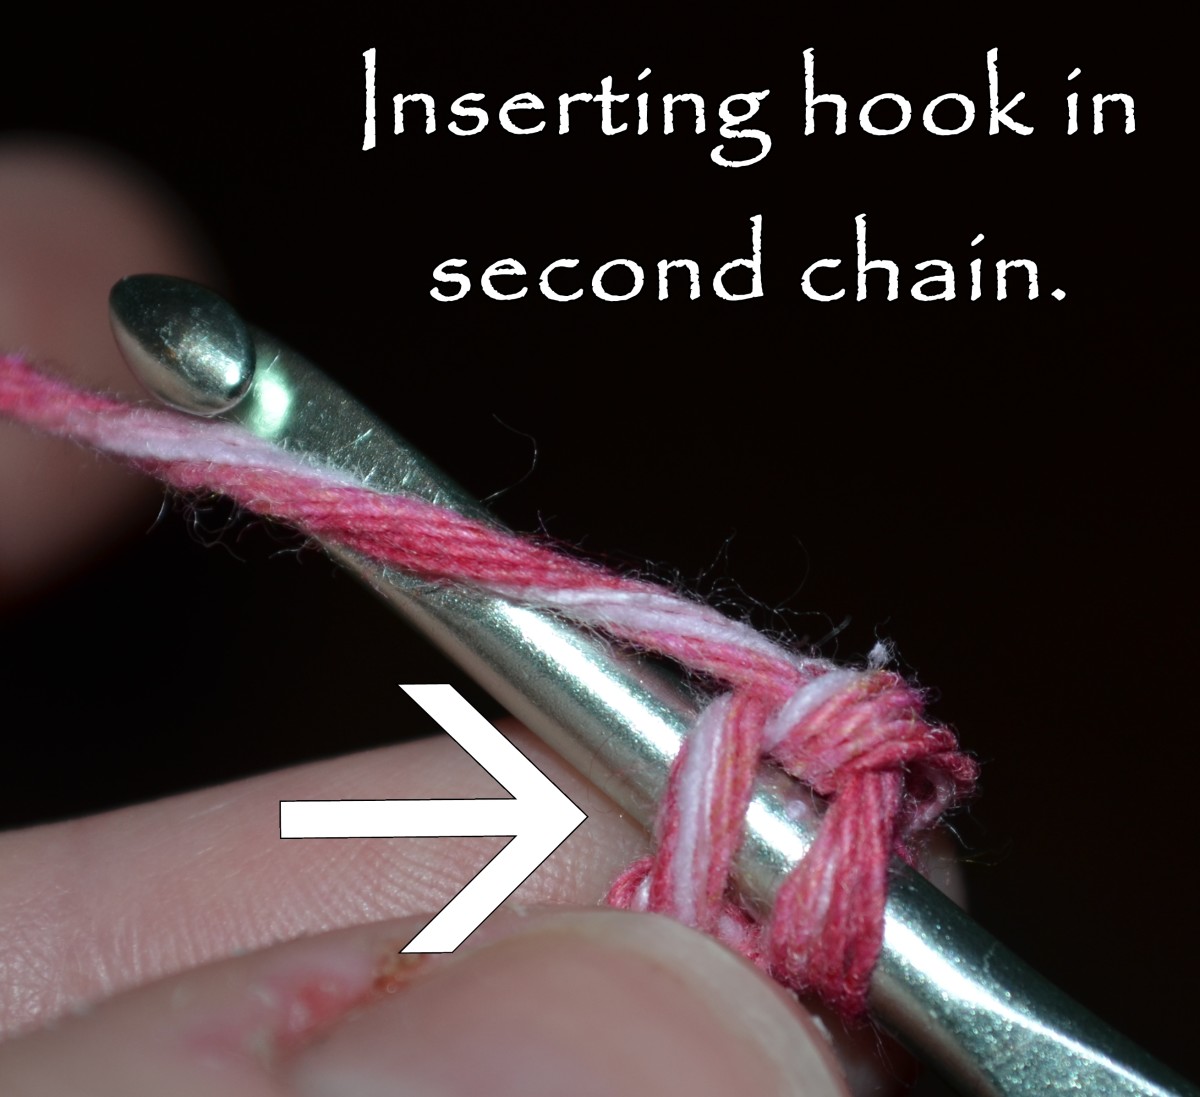 Another angle of inserting the hook in the second chain.